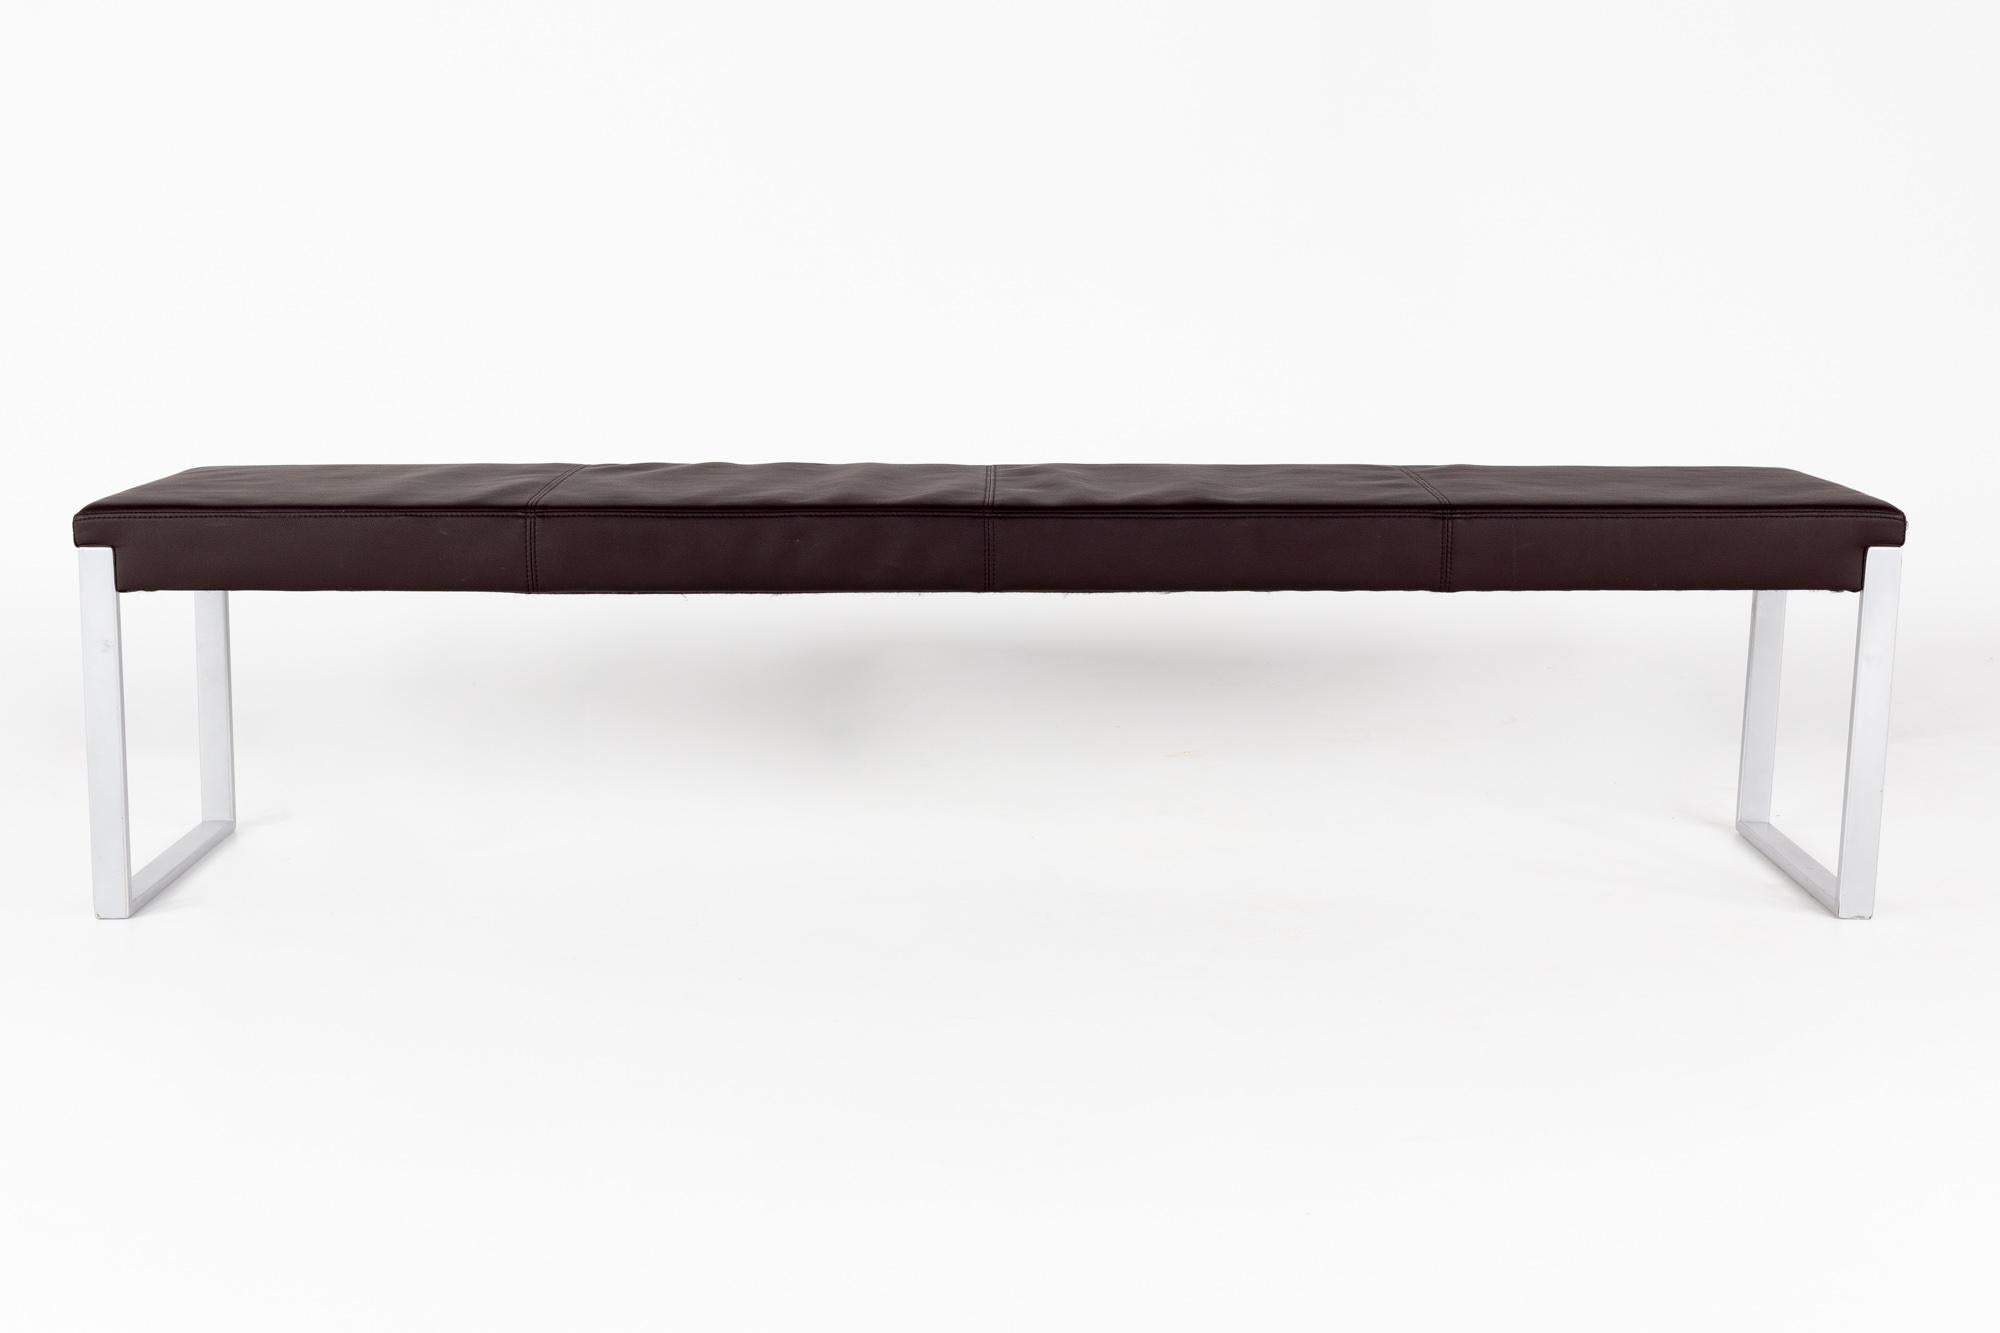 American Material Possessions Contemporary Long Leather and Steel Bench